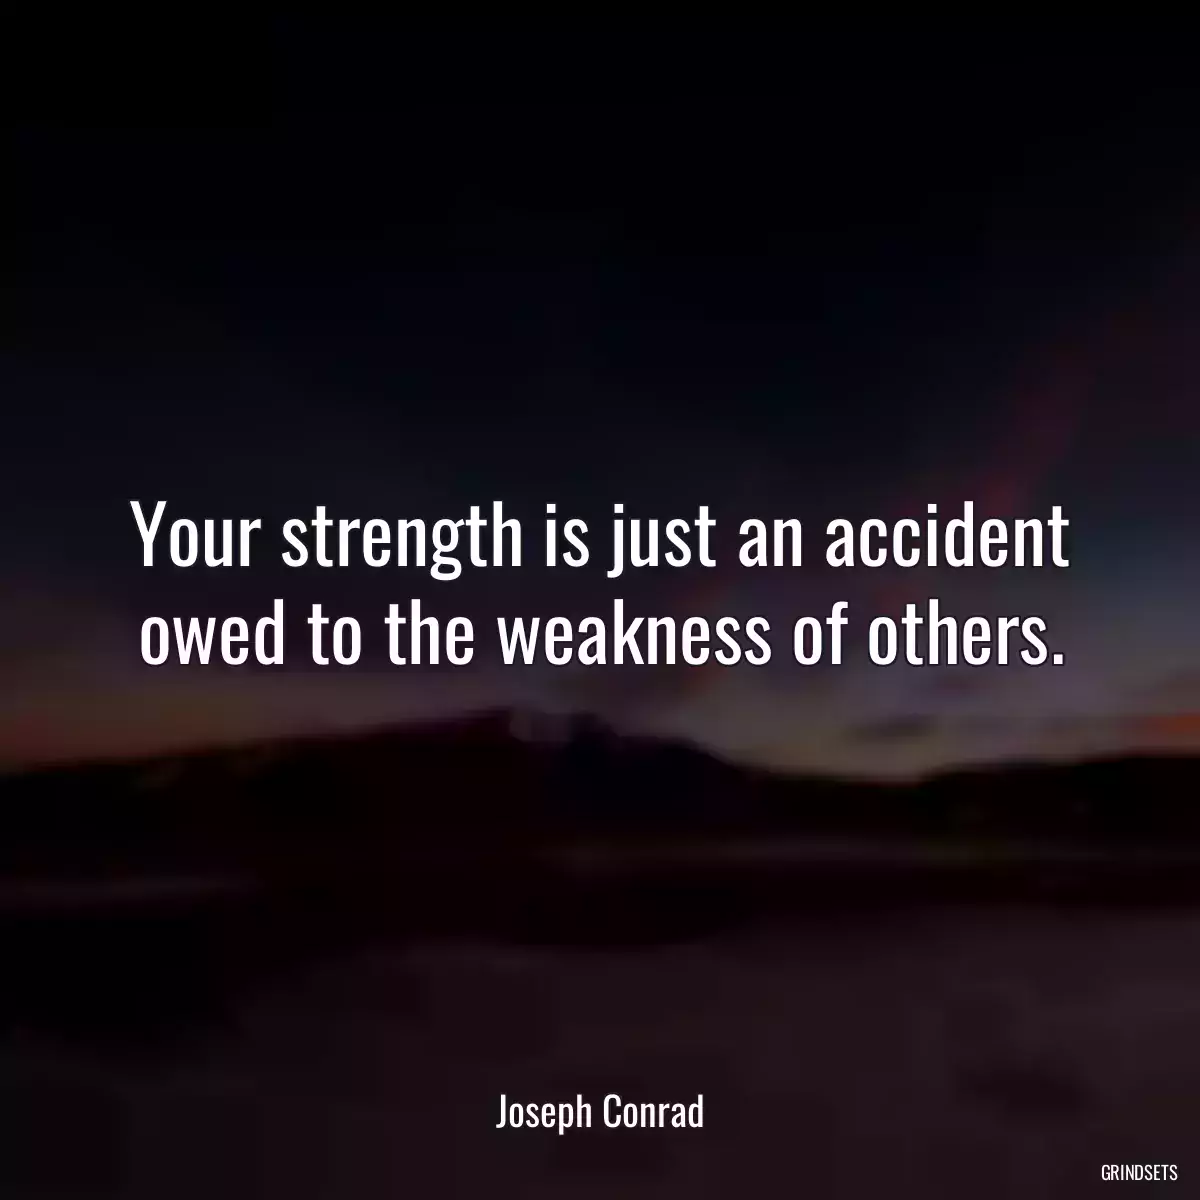 Your strength is just an accident owed to the weakness of others.